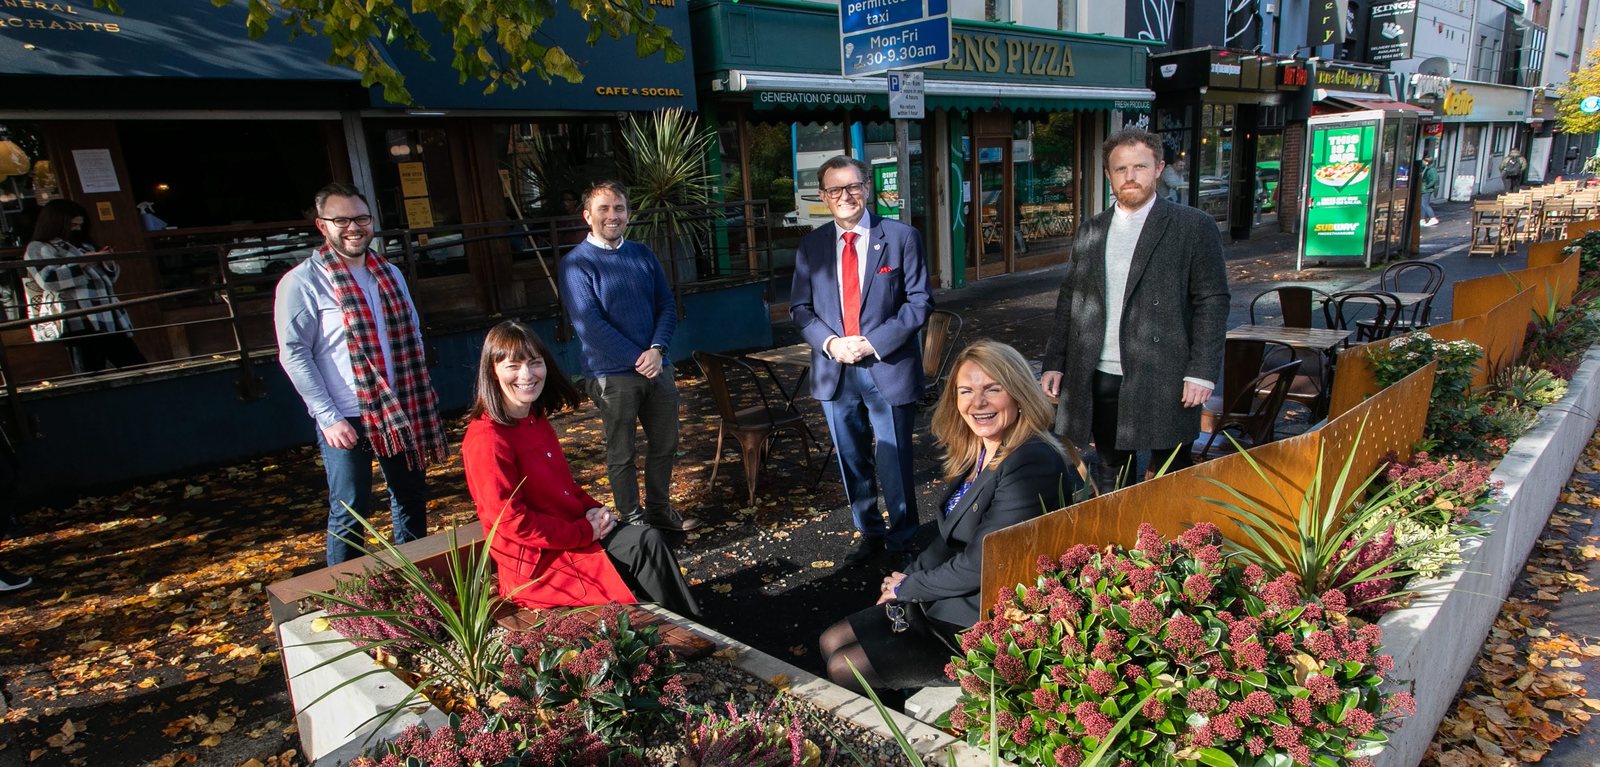 Ormeau Parklet - new public area created in former car parking spaces